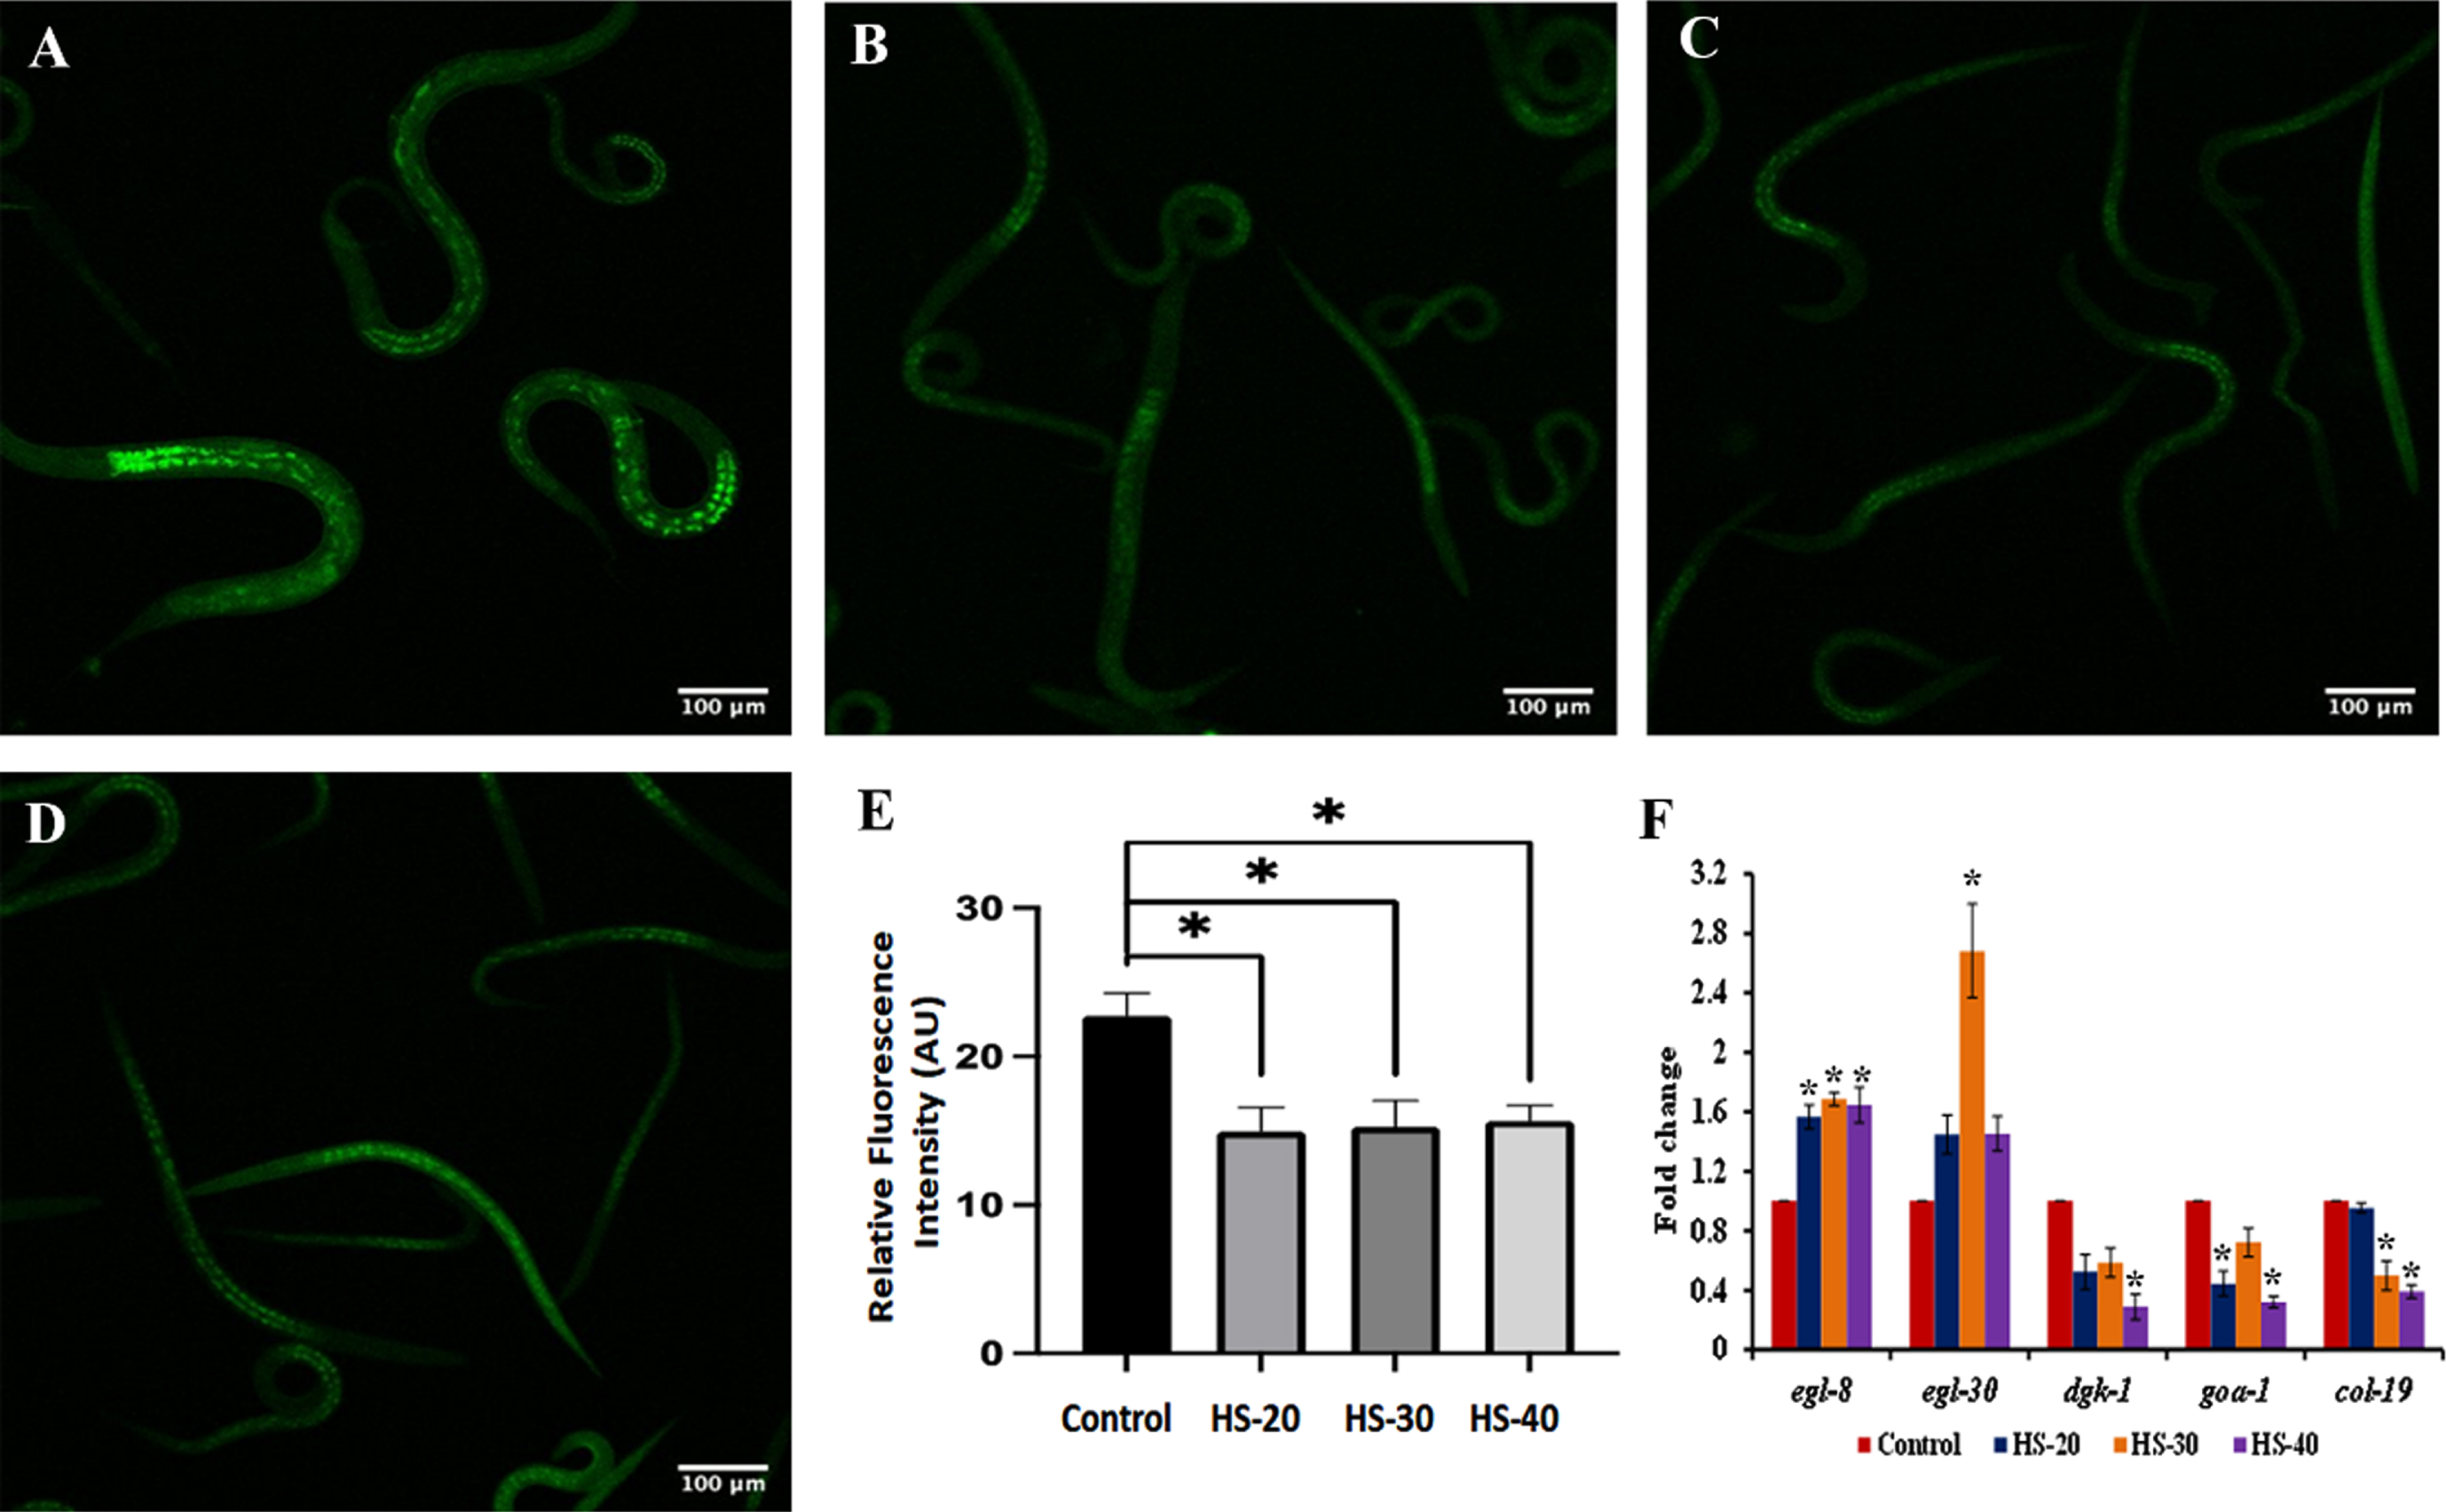 Representative confocal microscopic images of nematodes showing reduction in lipofuscin accumulation upon treatment with HS (A) Control (B) HS-20 (C) HS-30 (D) HS-40. (E) Quantitative analysis of relative fluorescence of lipofuscin (F) Transcriptional regulation of healthspan related genes (egl-8, egl-30, dgk-1, goa-1, col-19) by HS (* significant level at p < 0.05).